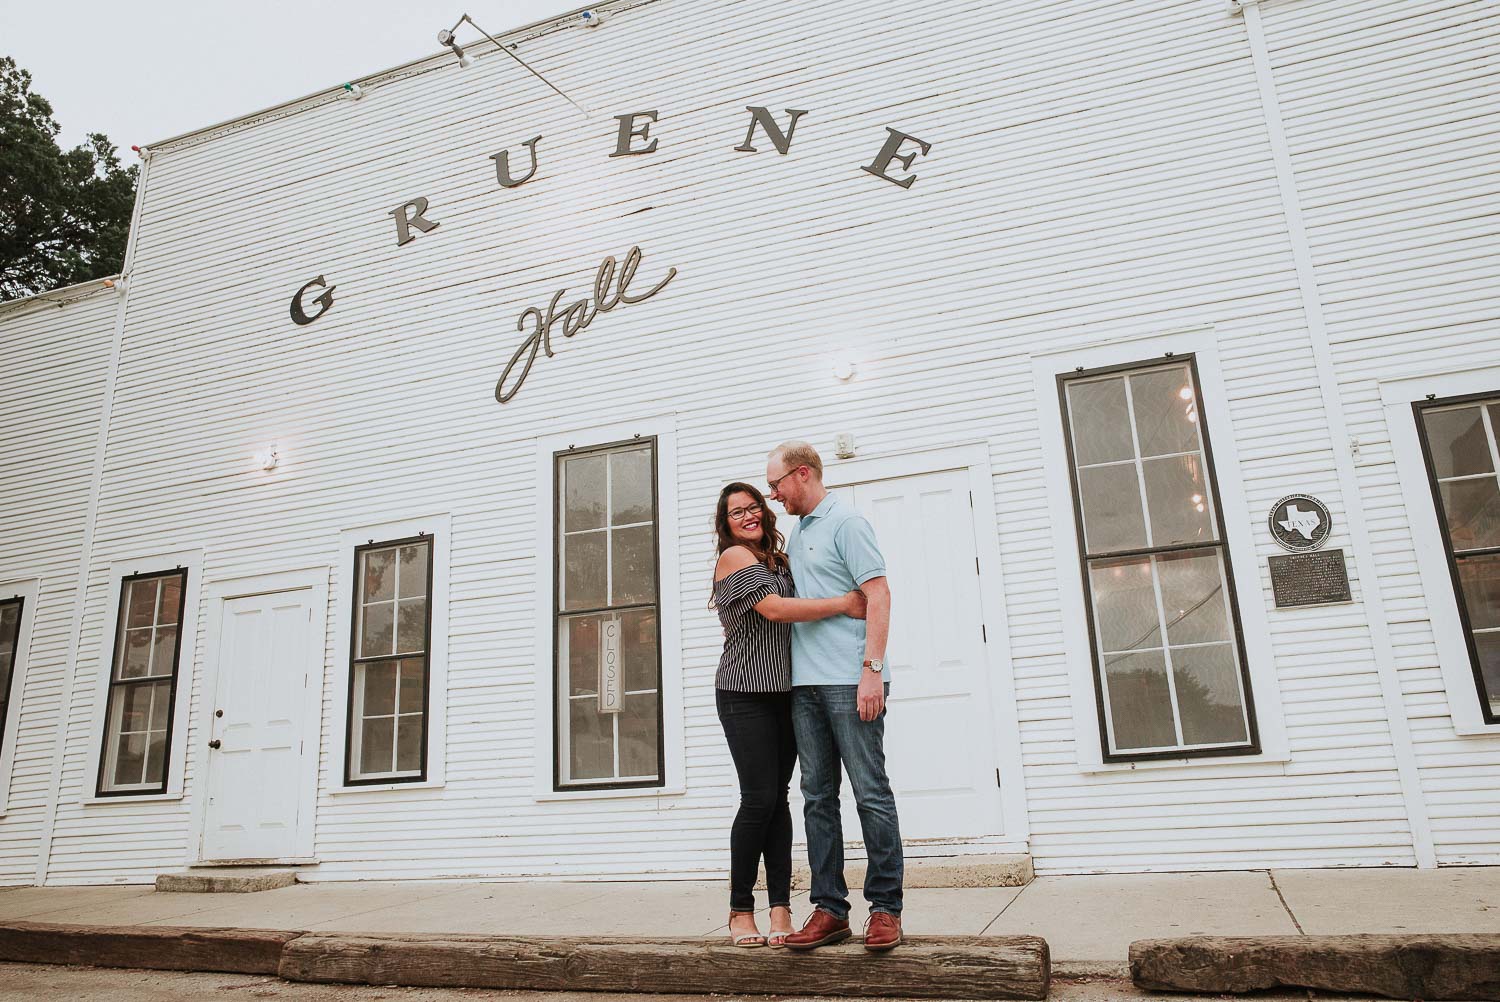 Andrea and Alex engagement session outside Gruene Hall Dance hall built in the 19th century hosting live country, Americana & blues musicians nightly.